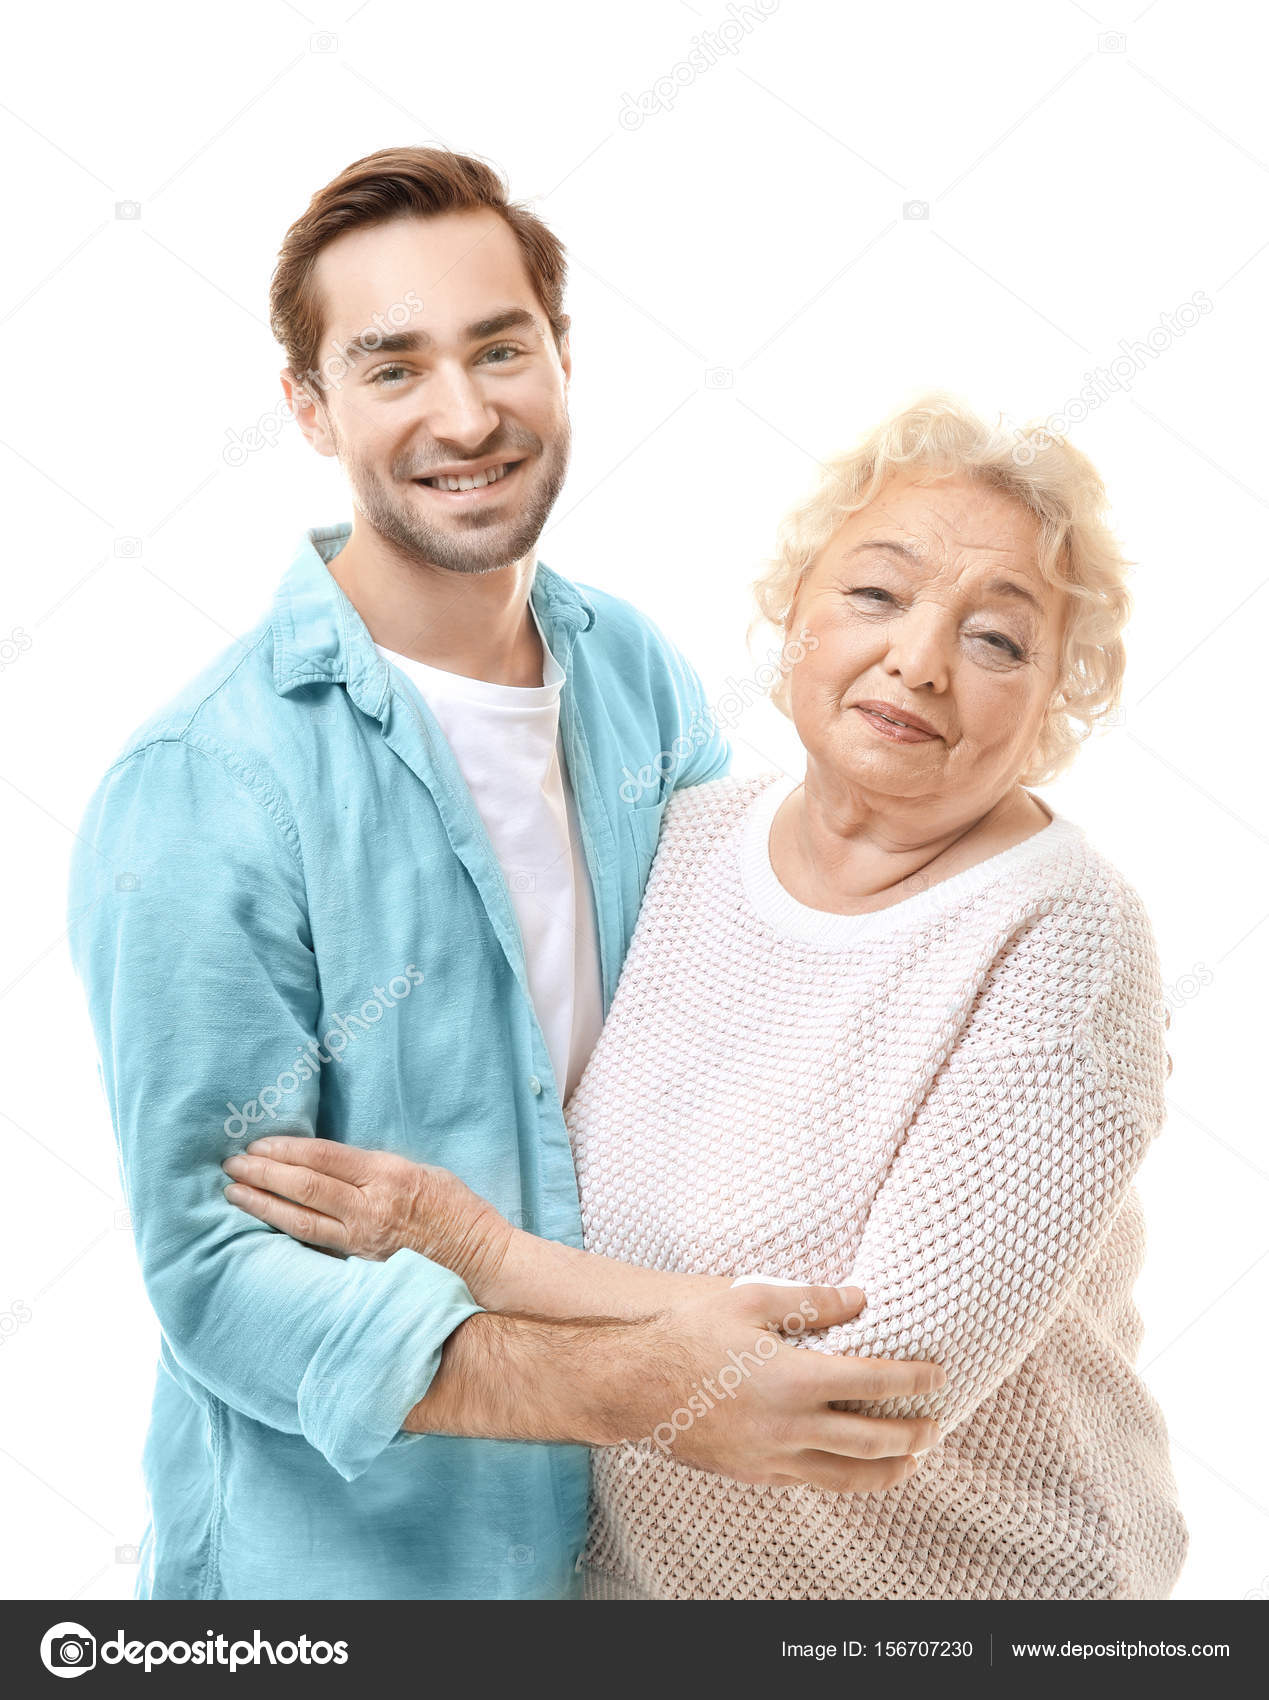 Young man with grandmother — Stock Photo © belchonock #156707230